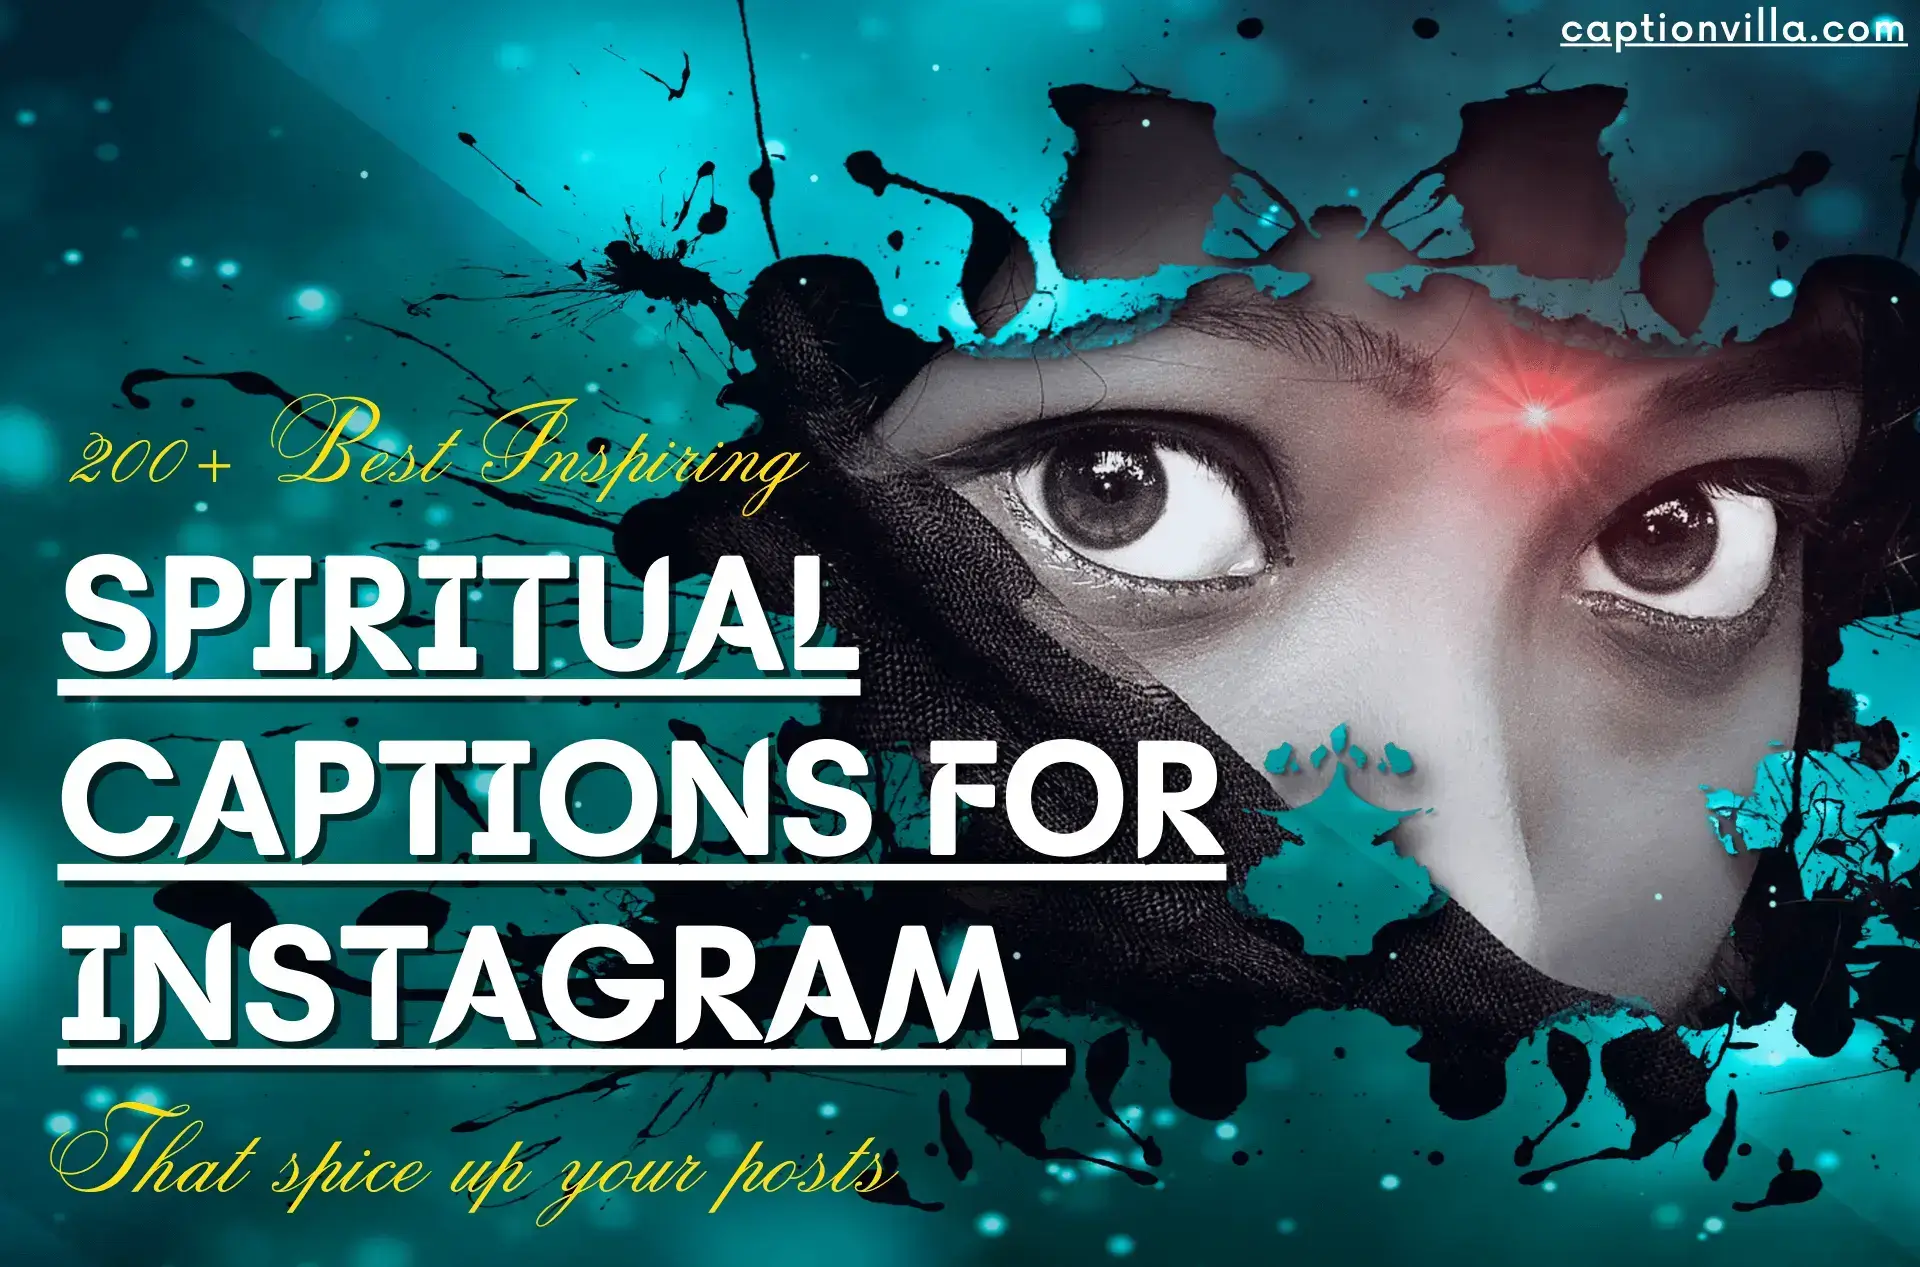 An attractive image of young girl eyes and having the title of Spiritual Captions for Instagram.